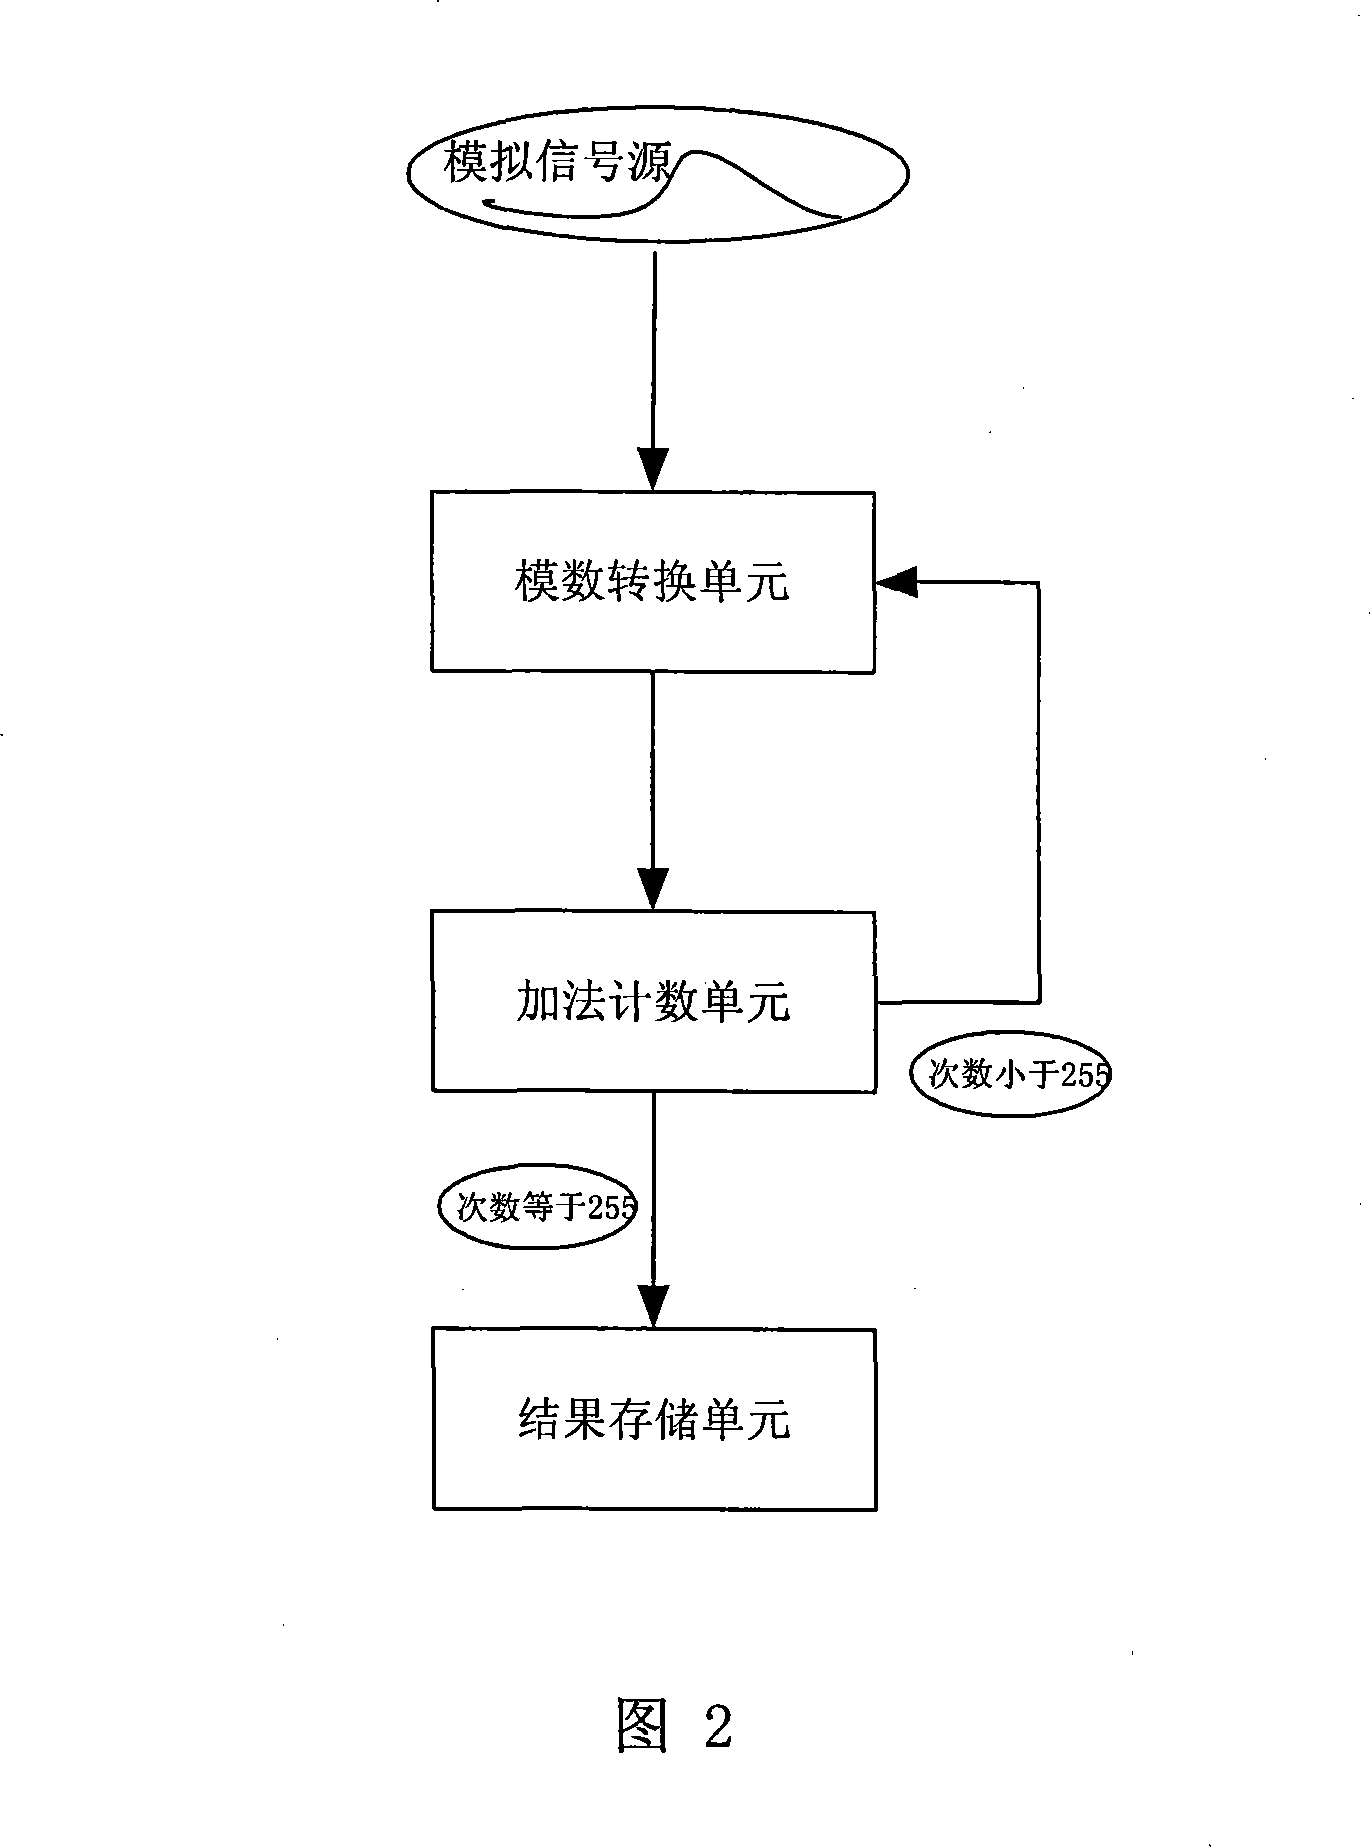 Apparatus and method for obtaining A/D conversion effective value